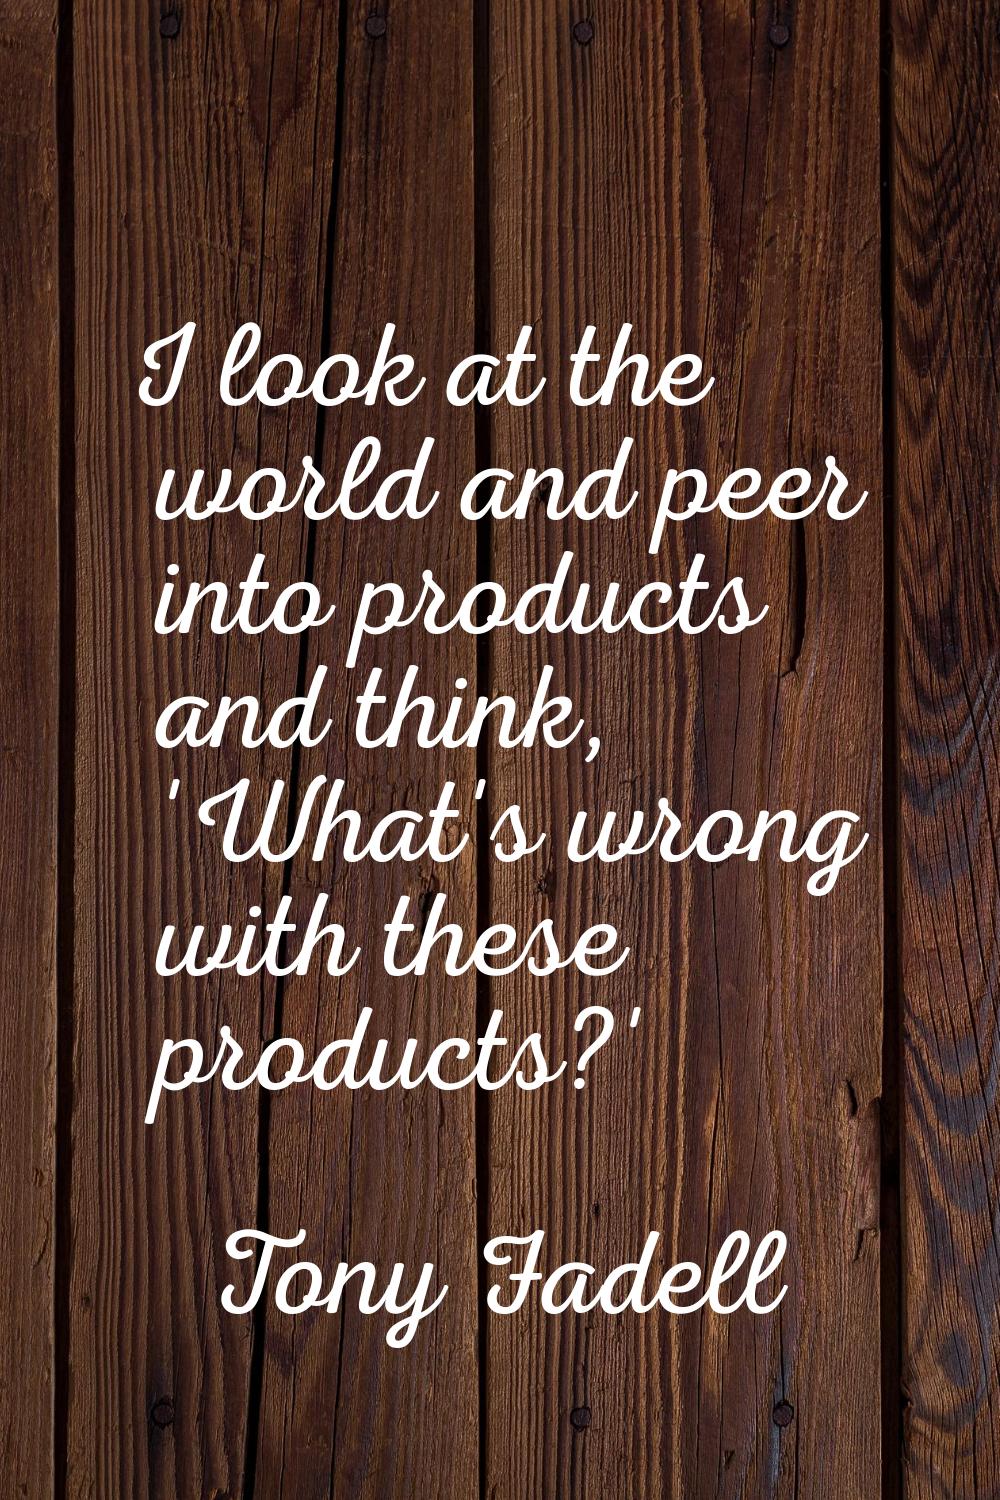 I look at the world and peer into products and think, 'What's wrong with these products?'